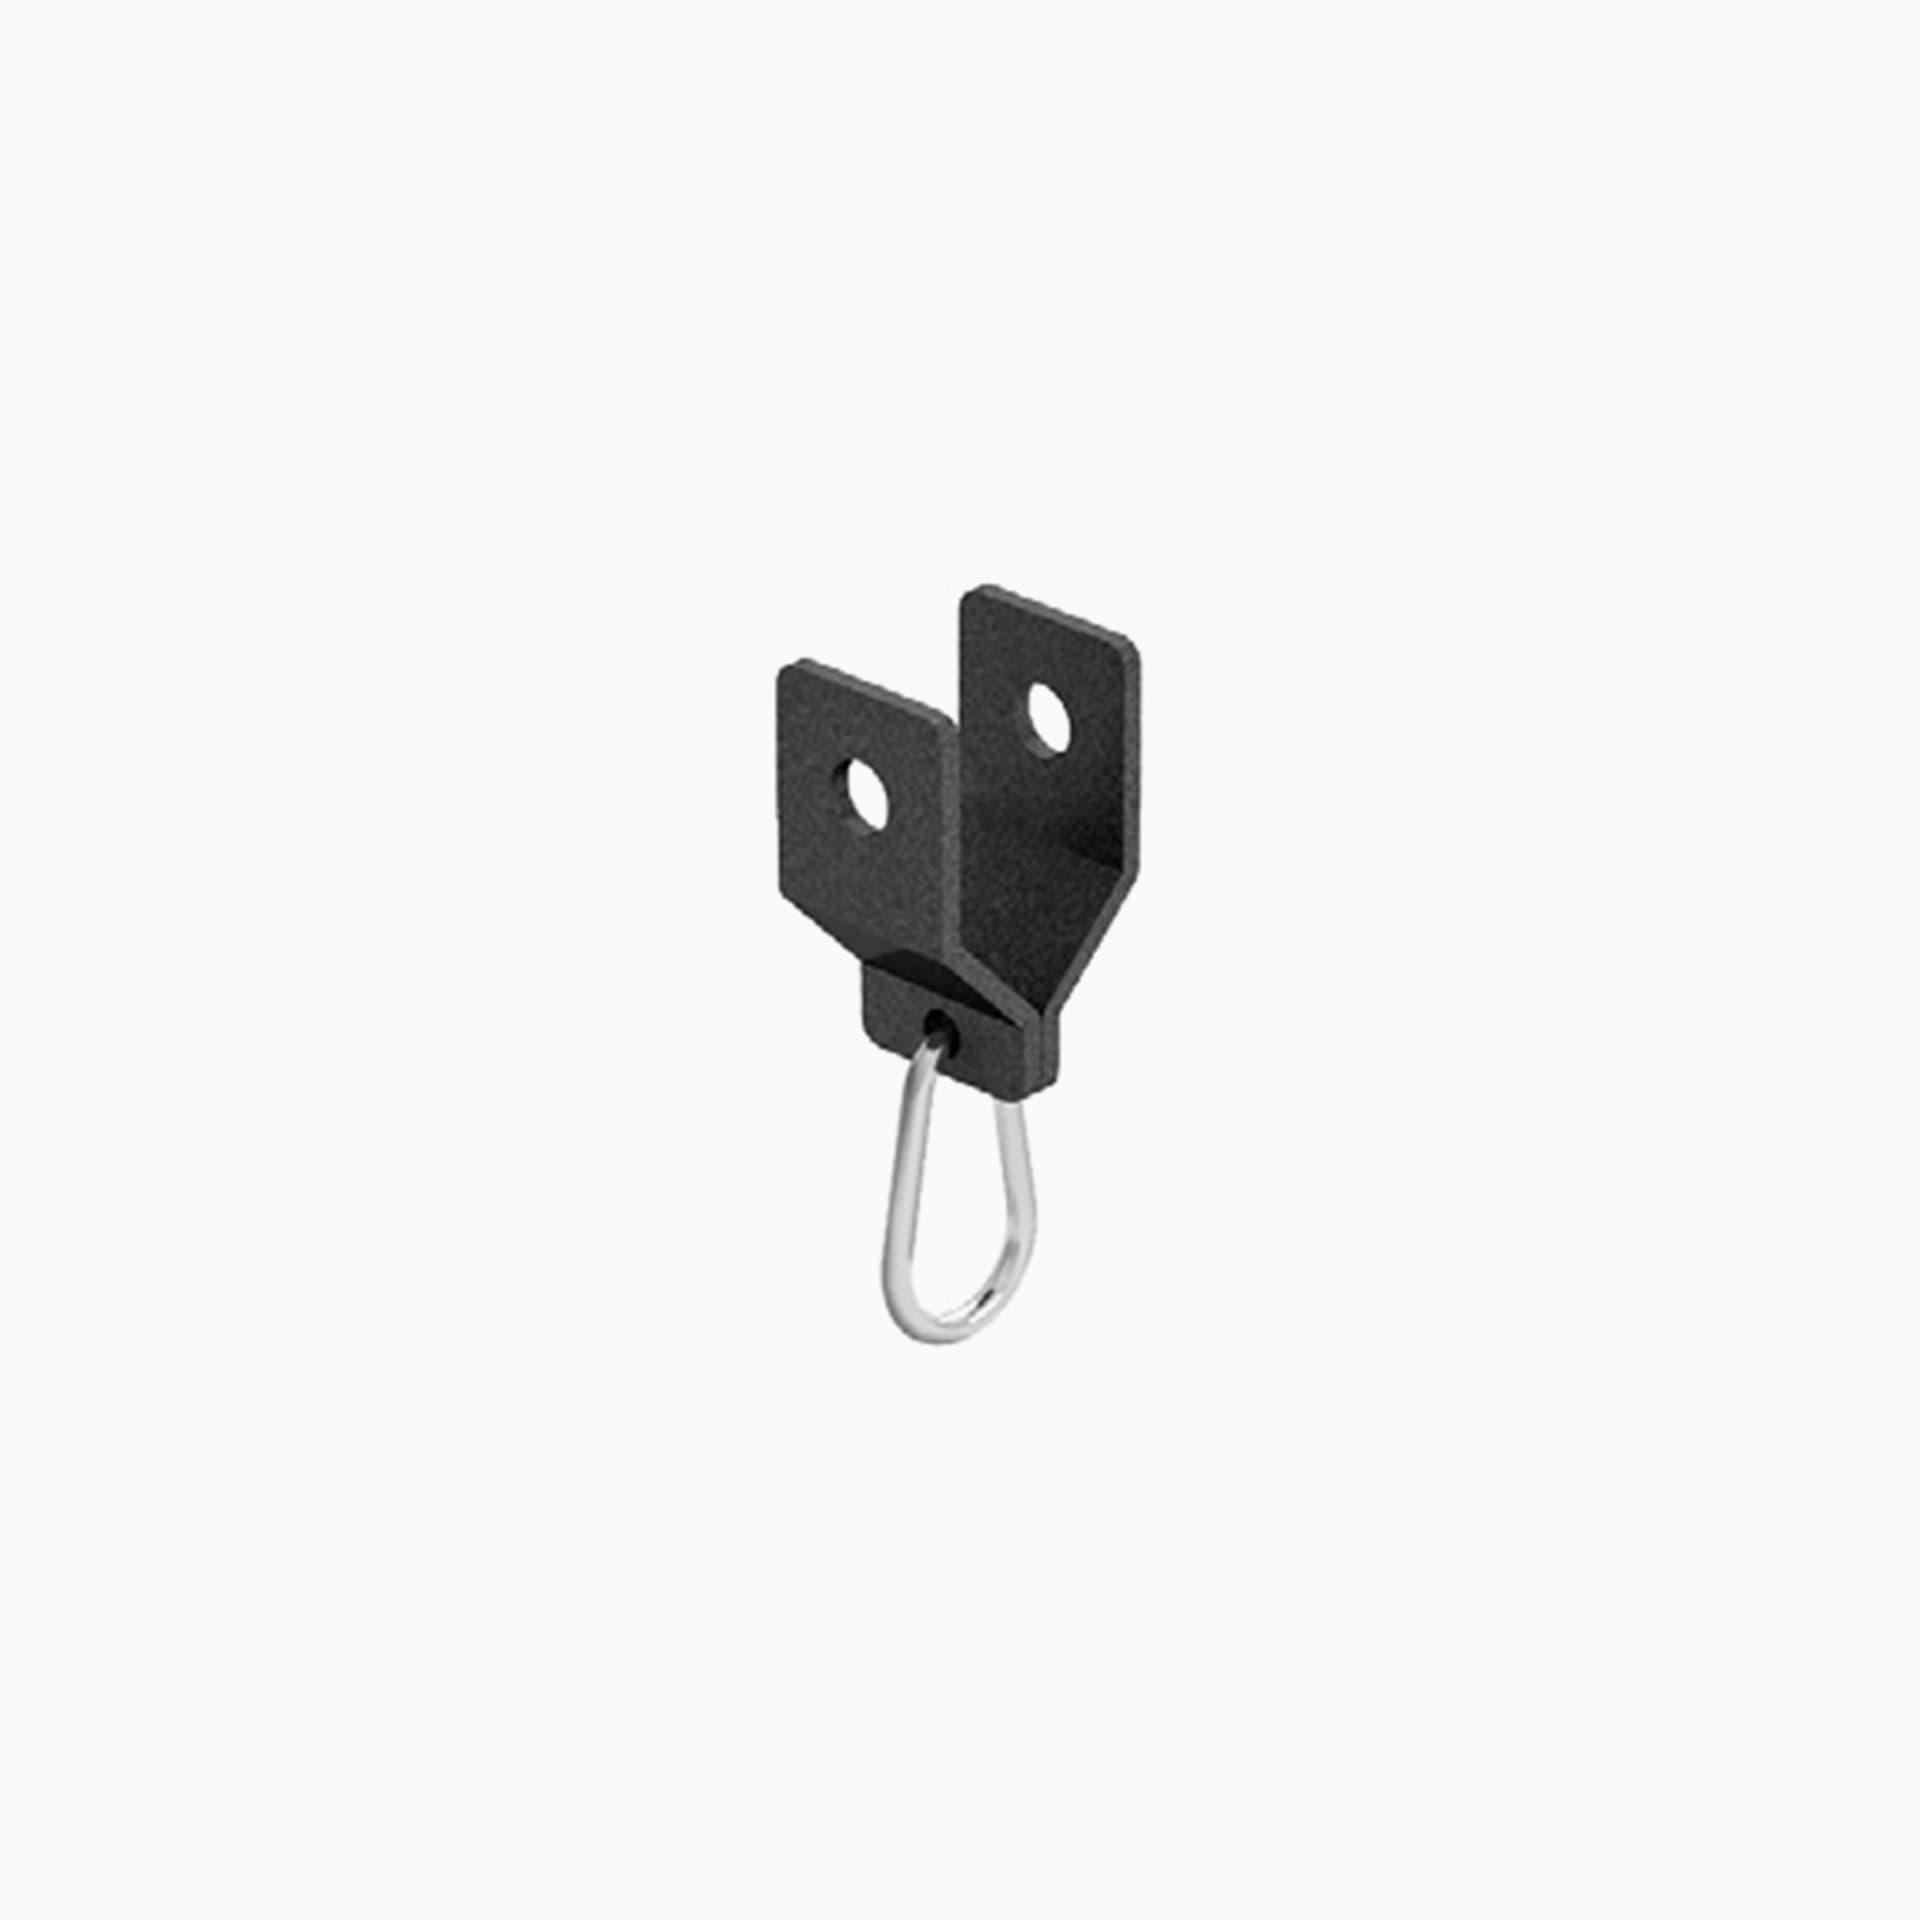 XP FRAME MOUNT ACCESSORY SHACKLE W/CARABINER ATTACHMENT